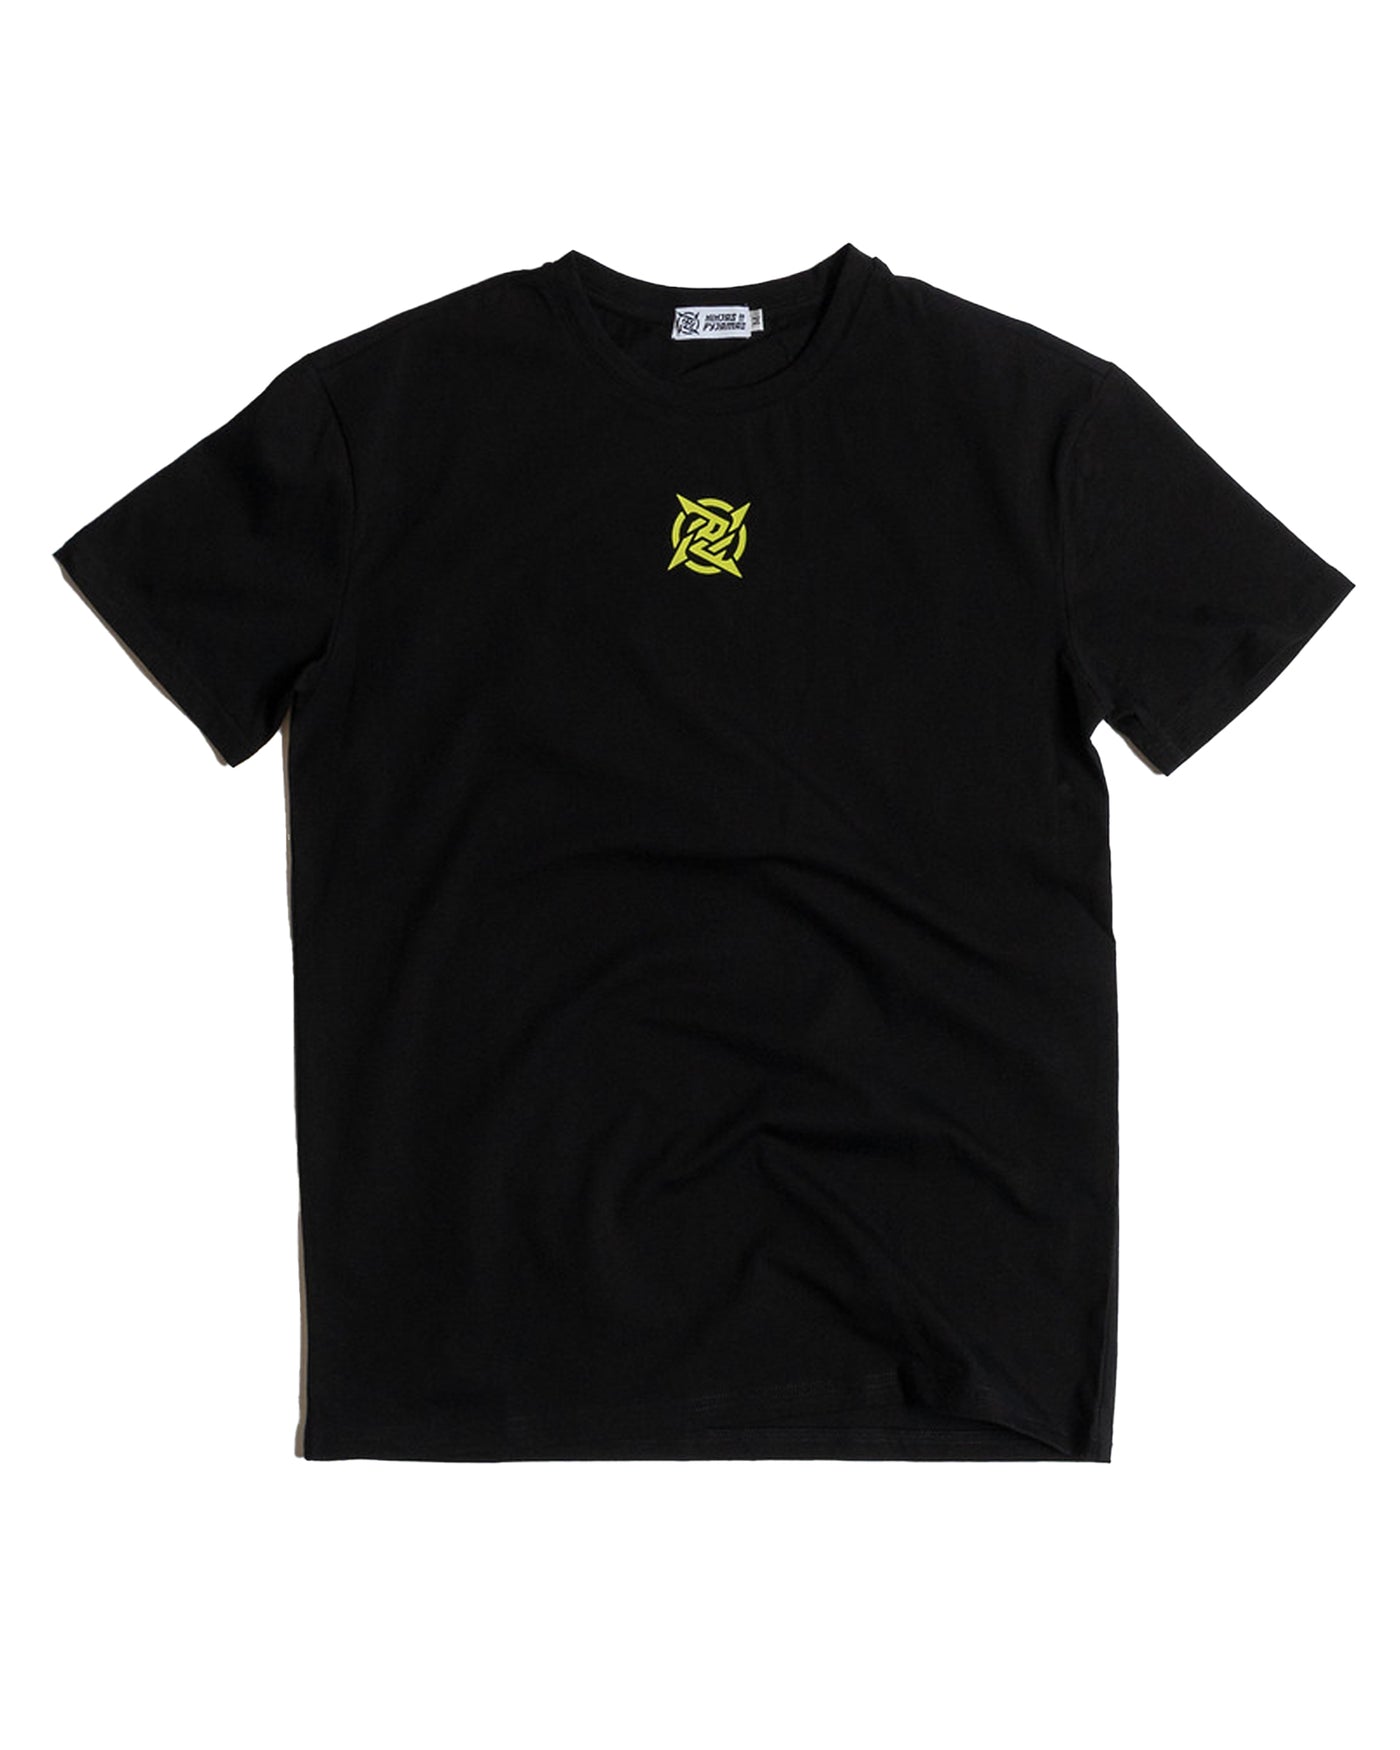 Lagom Collection - Black T-shirt from Ninjas in Pyjamas Shop. An image displaying a black t-shirt from the Lagom Collection, featuring the Ninjas in Pyjamas logo subtly printed on the chest. This versatile and trendy t-shirt is a wardrobe essential, allowing you to express your passion for esports and NIP in a sleek and comfortable manner.